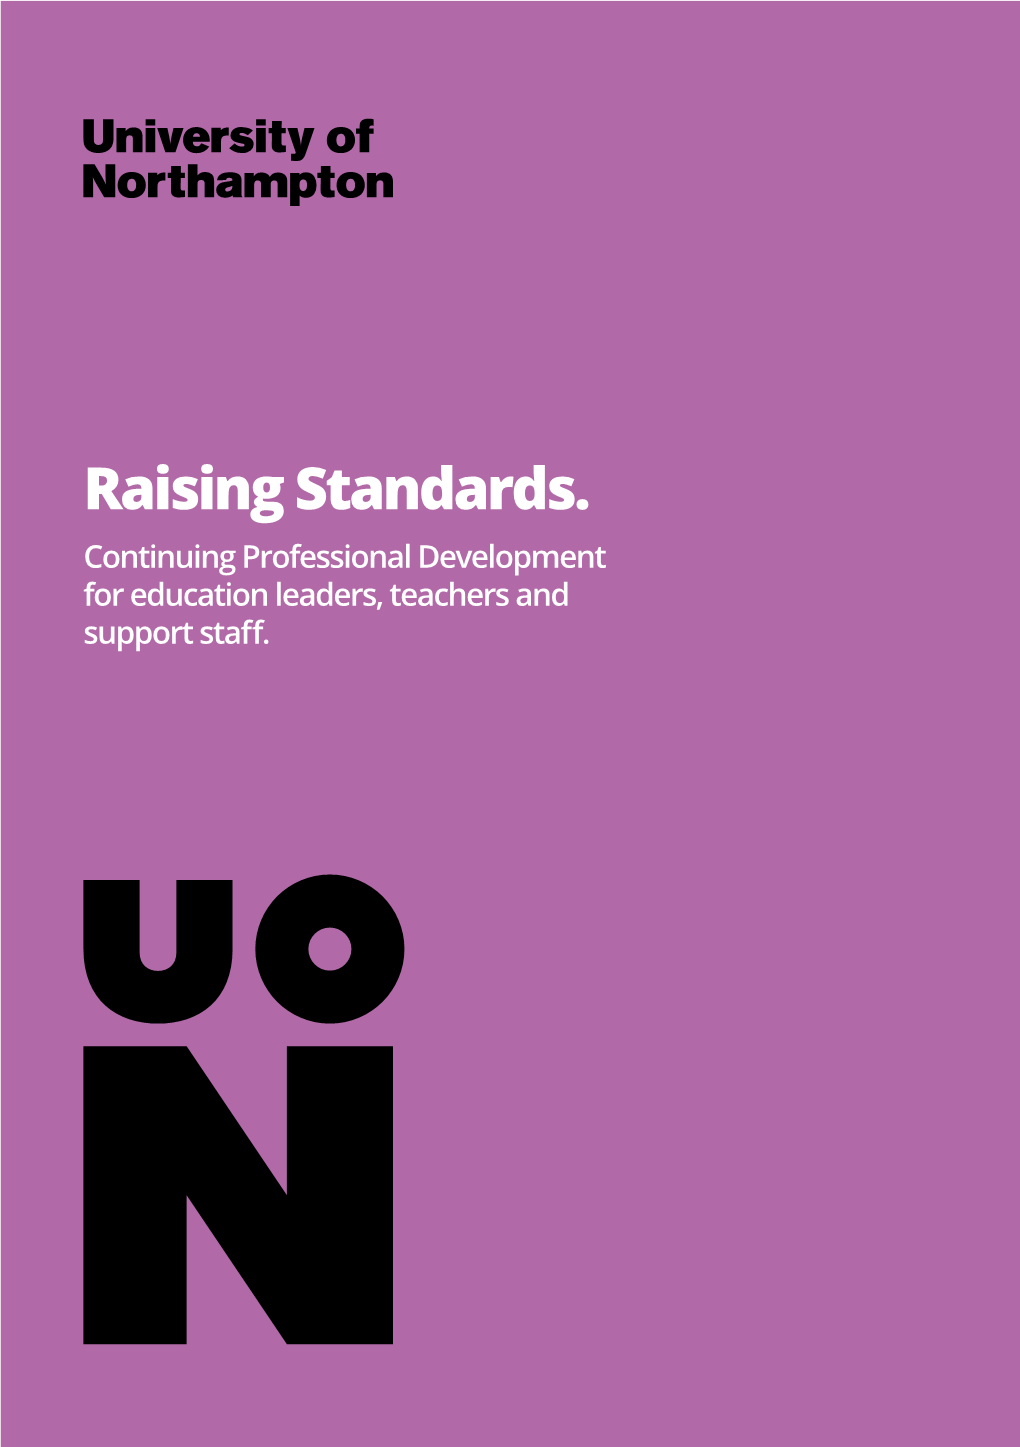 Raising Standards. Continuing Professional Development for Education Leaders, Teachers and Support Staff